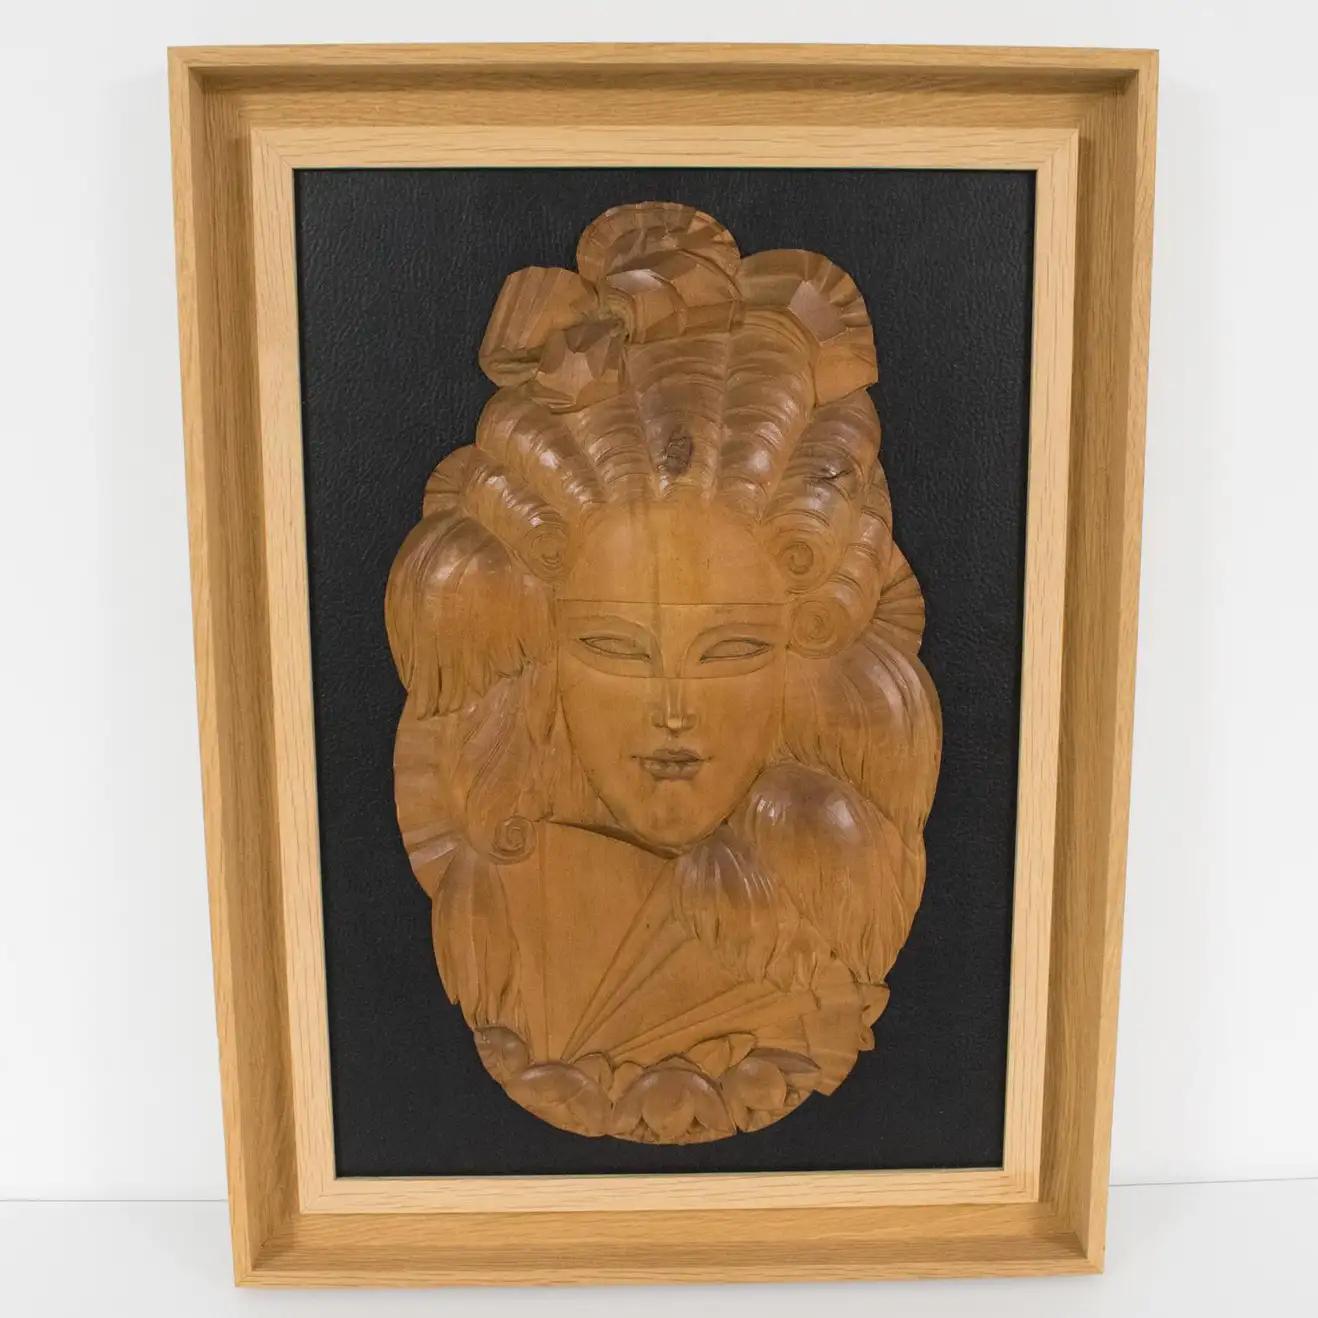 Art Deco Handcrafted Wood Panel Wall Sculpture Venetian Mask, 1930s For Sale 4